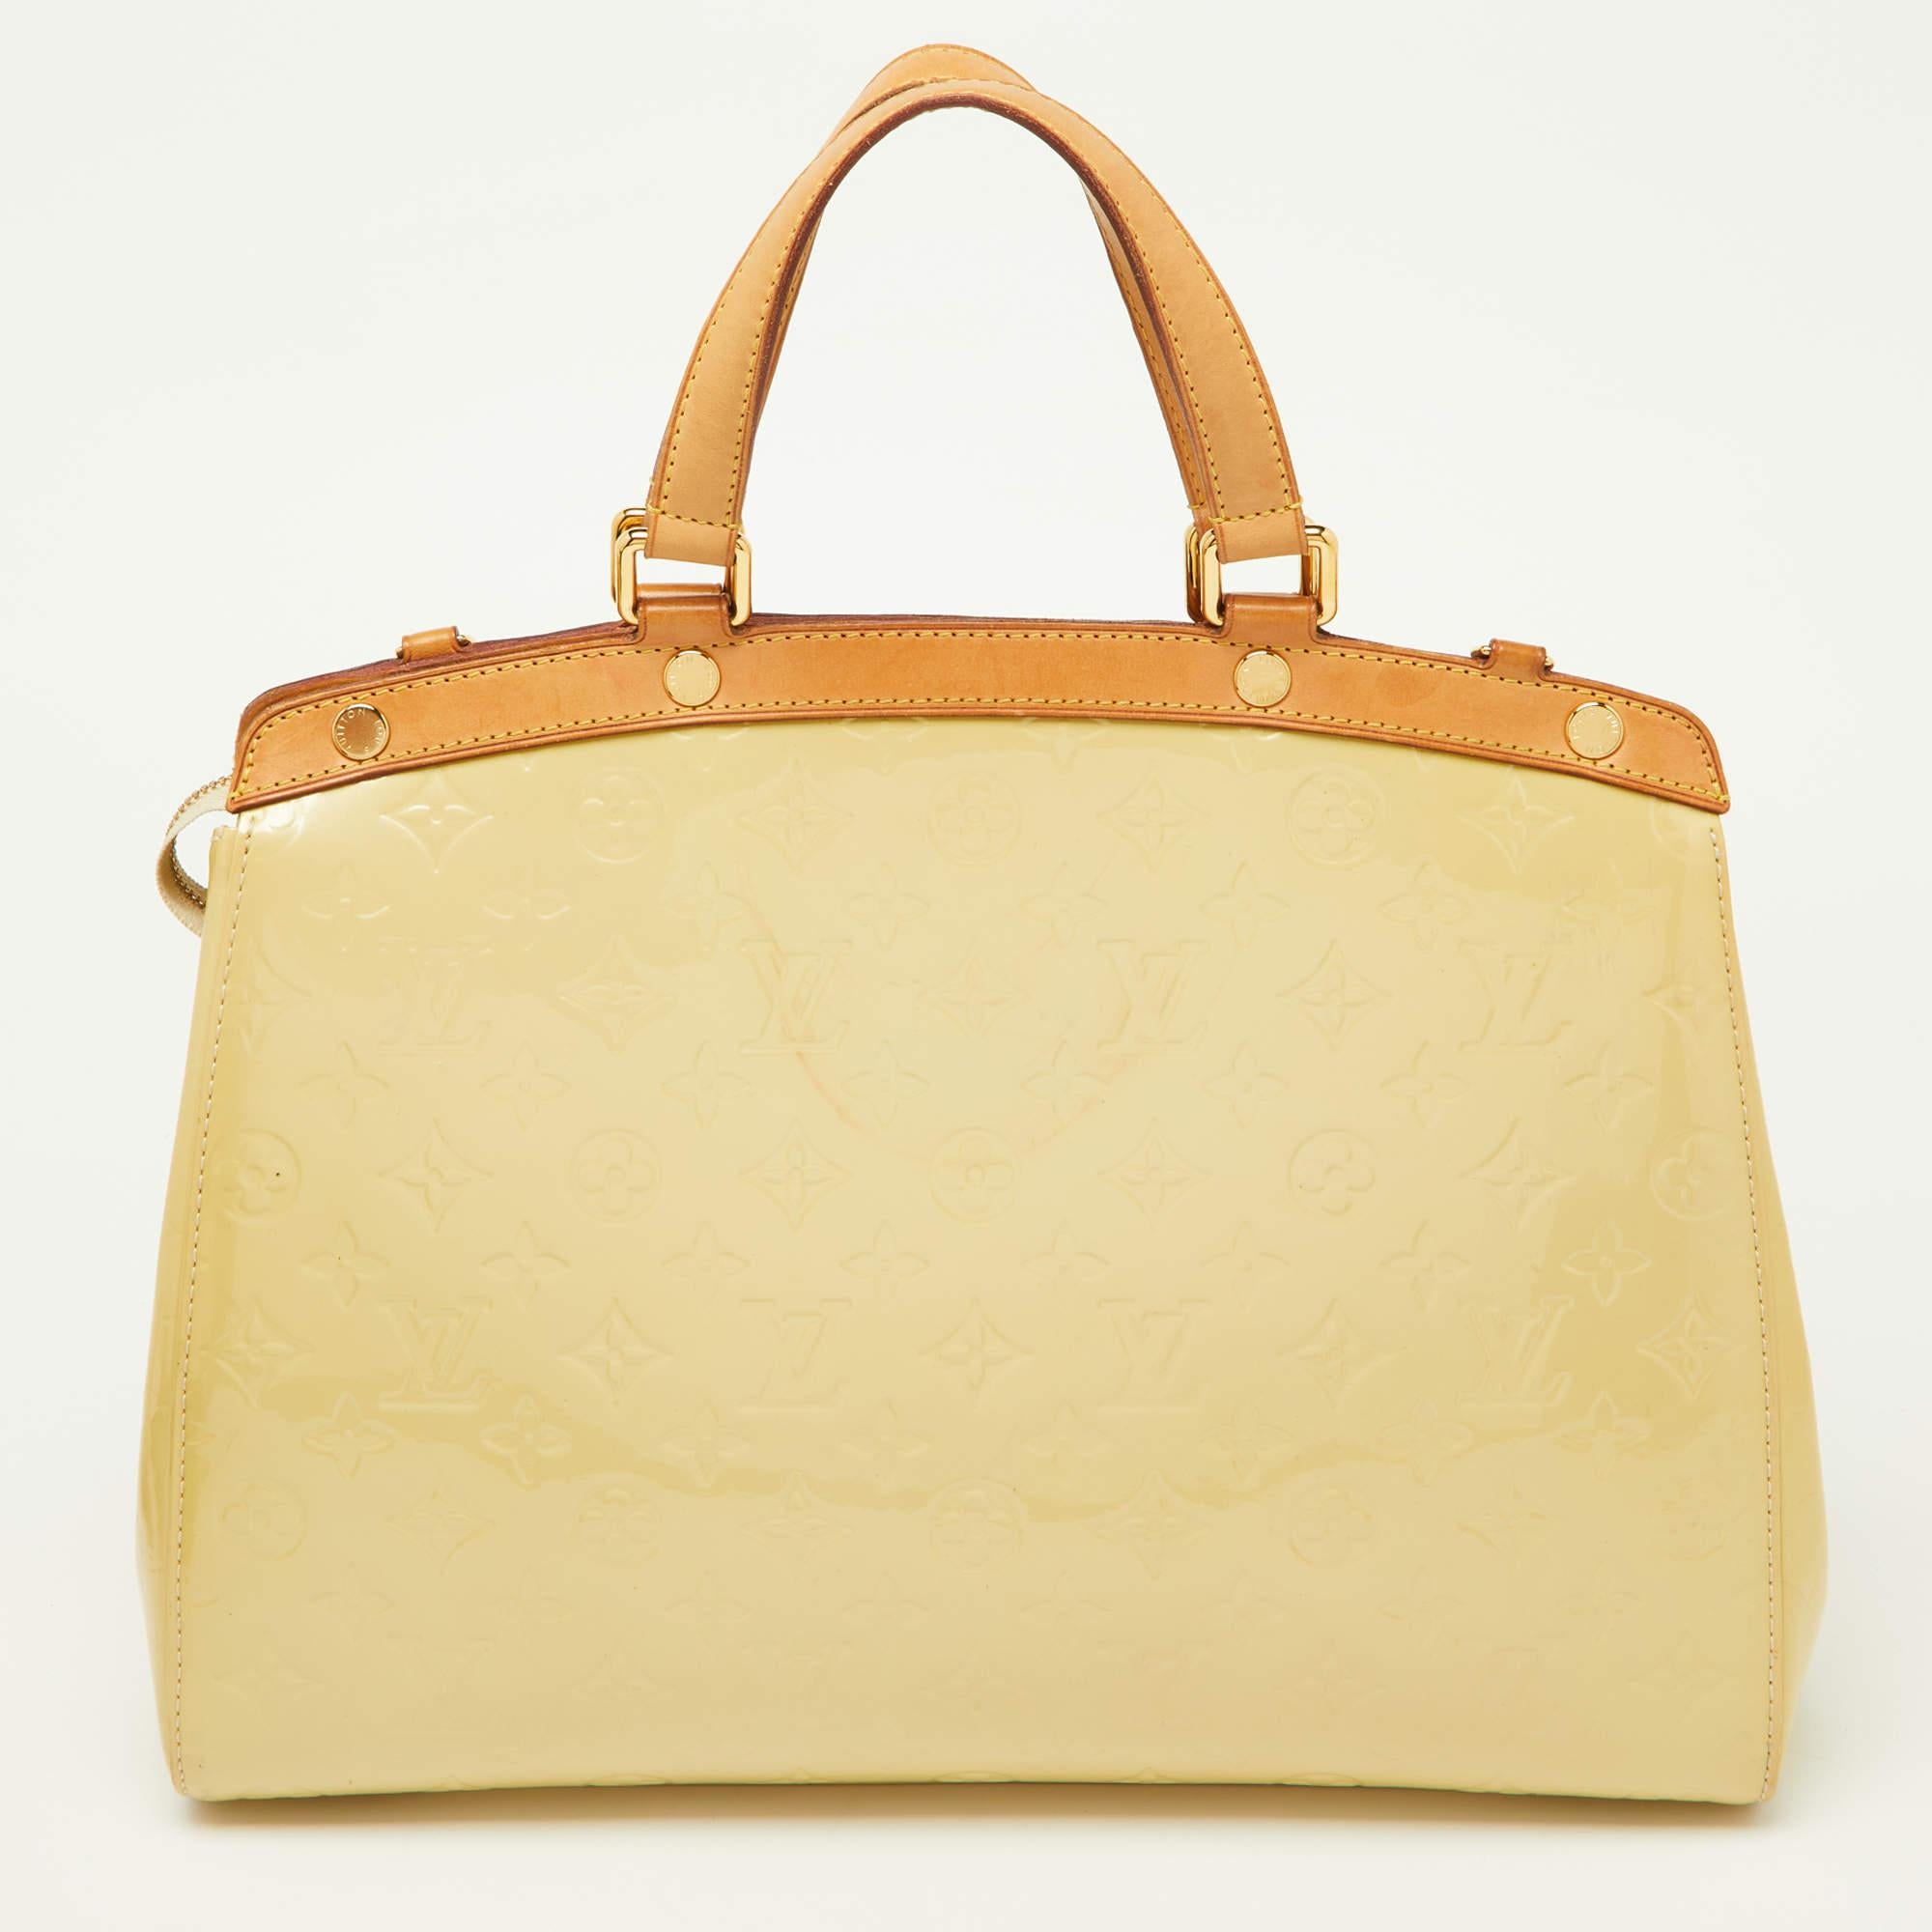 This Brea GM bag from the House of Louis Vuitton will sway you with its precise shape, style, and design. It is made from Blanc Corail Monogram Vernis into a structured, neat silhouette. It flaunts gold-toned fittings, dual top handles, and a